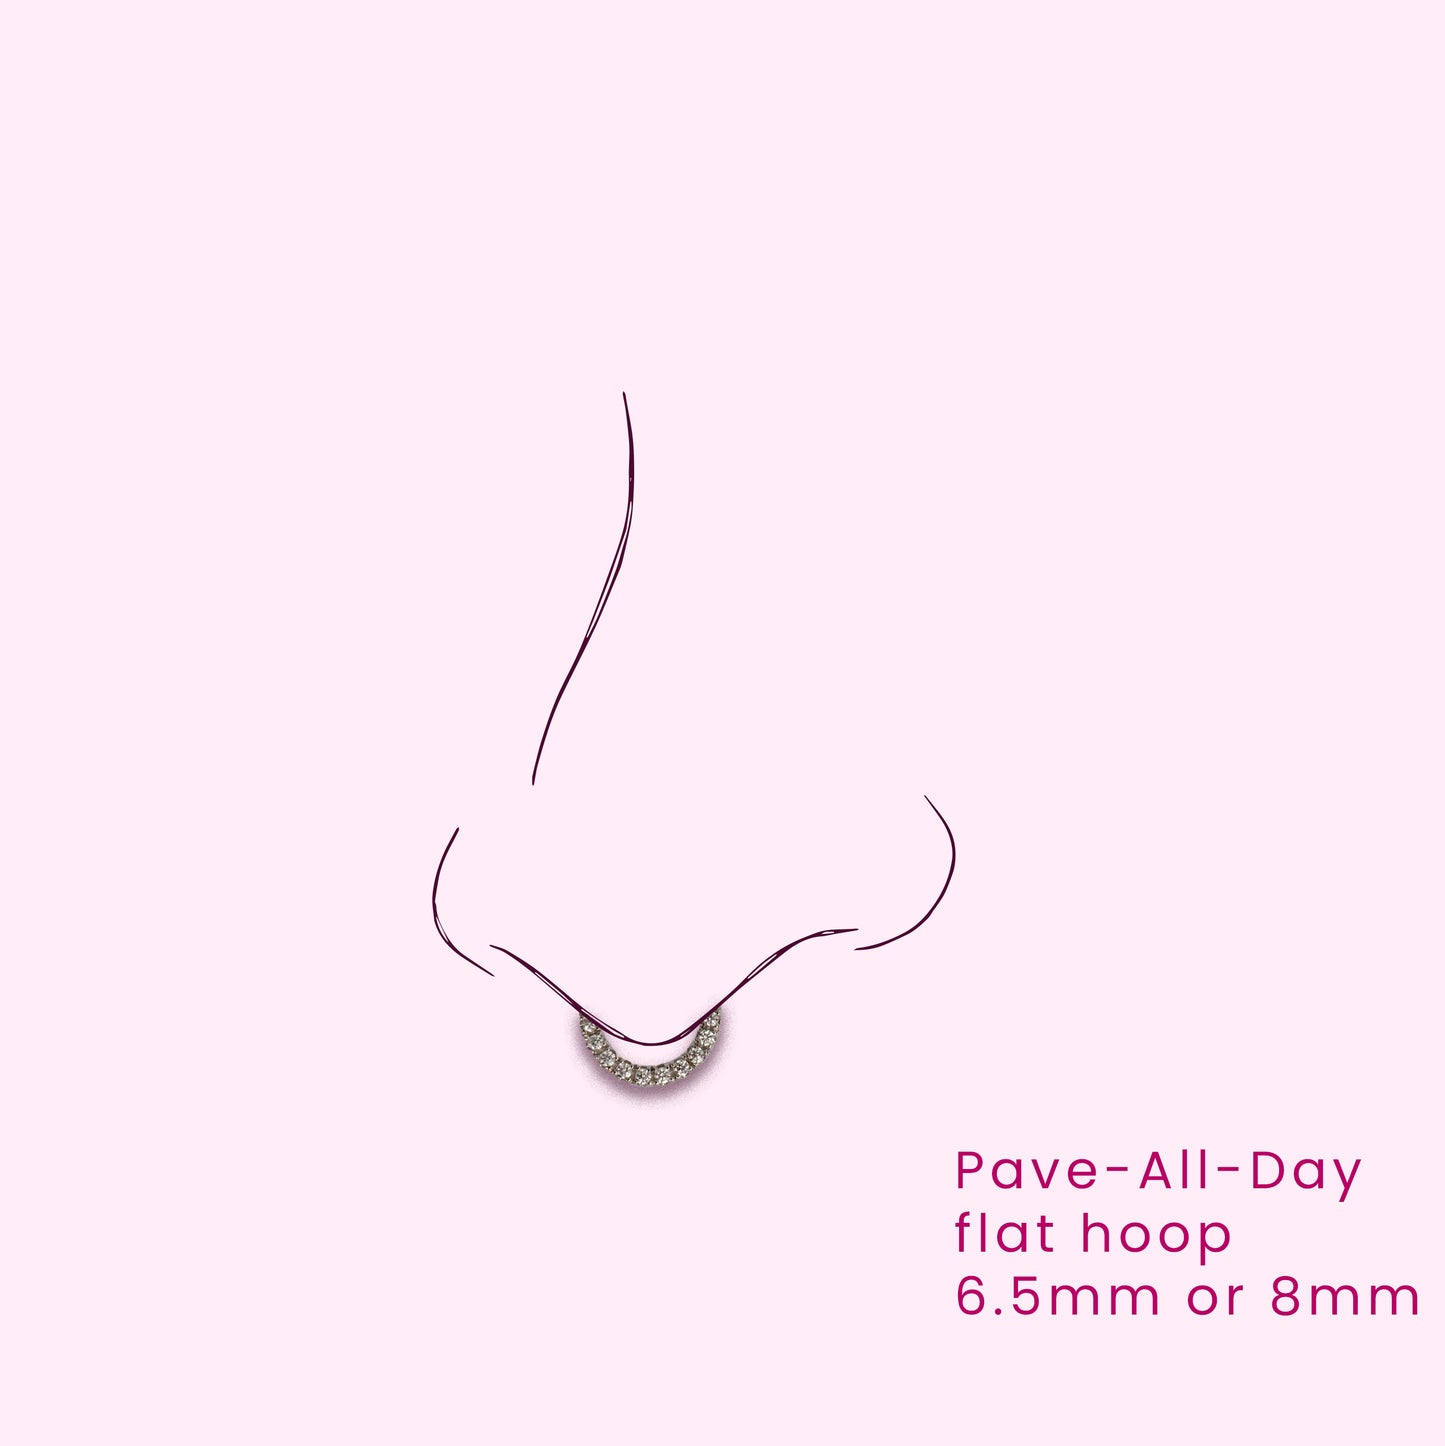 Pave-All-Day Flat Hoop